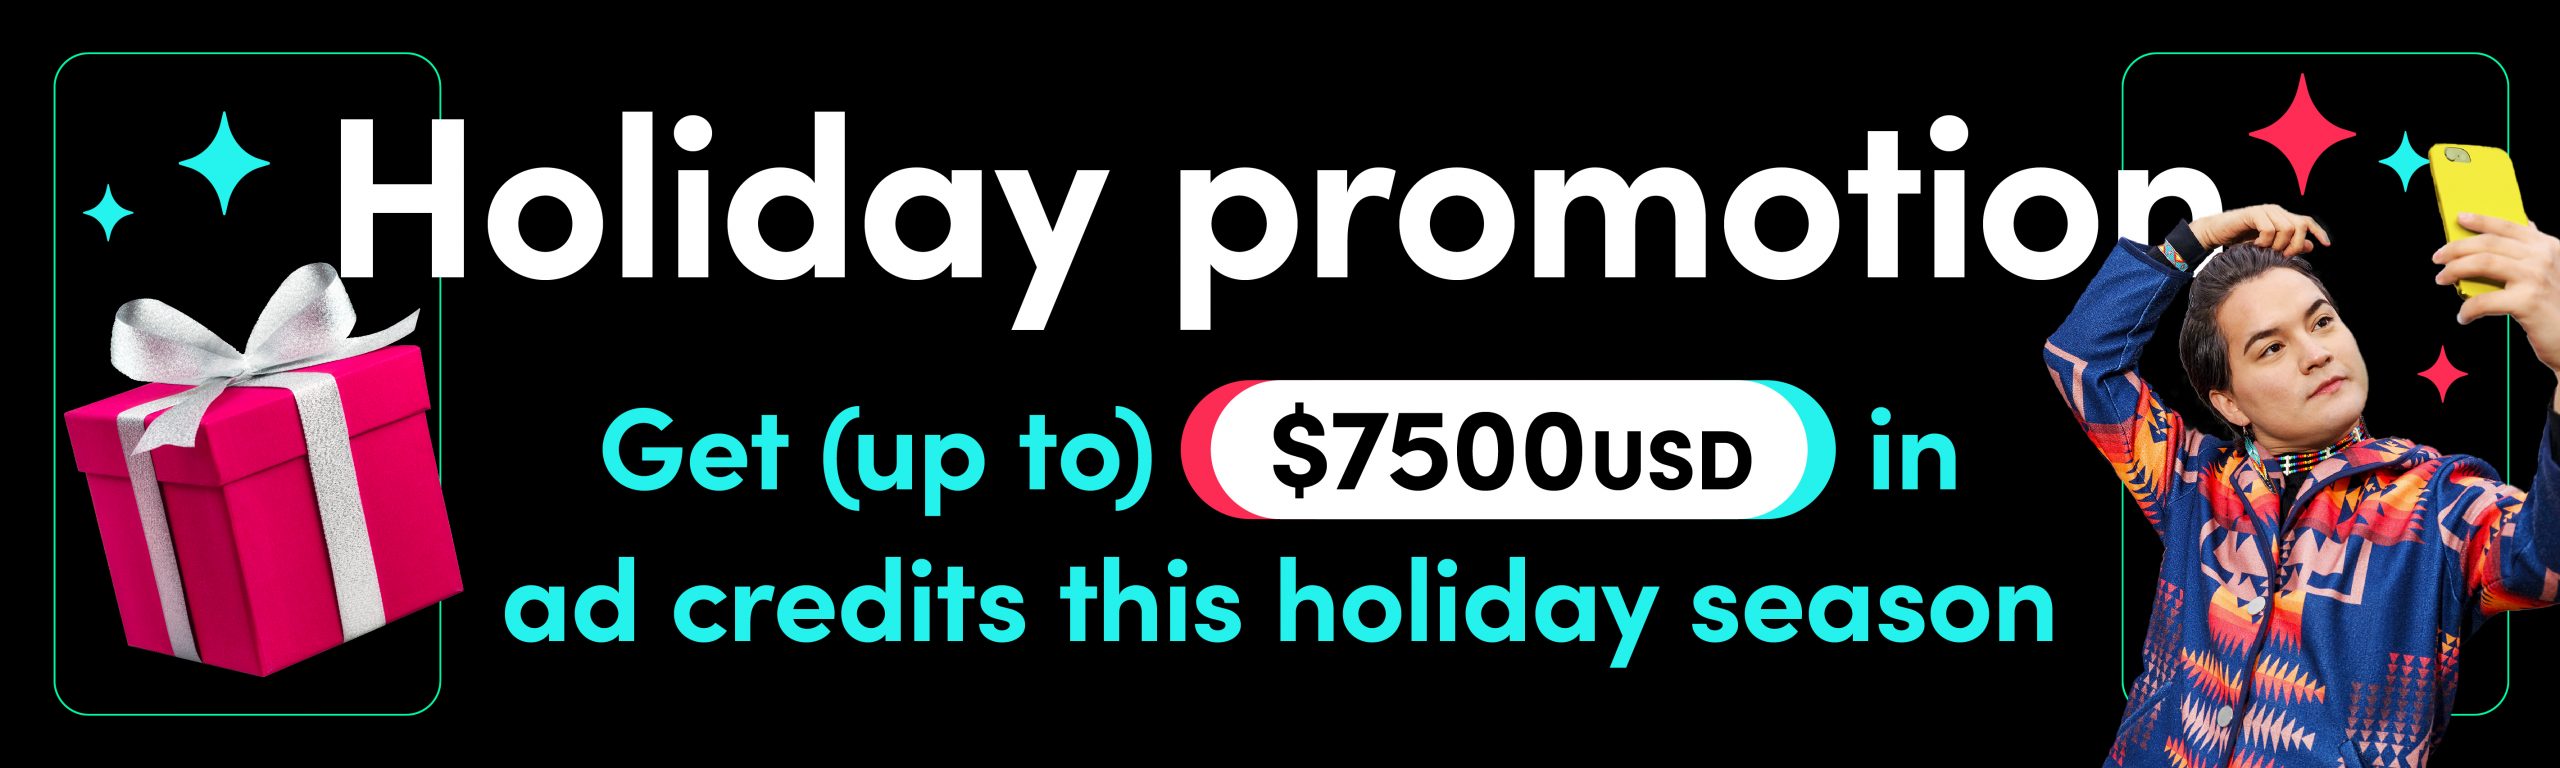 Get up to US$7,500 Ad Credits for the holiday season